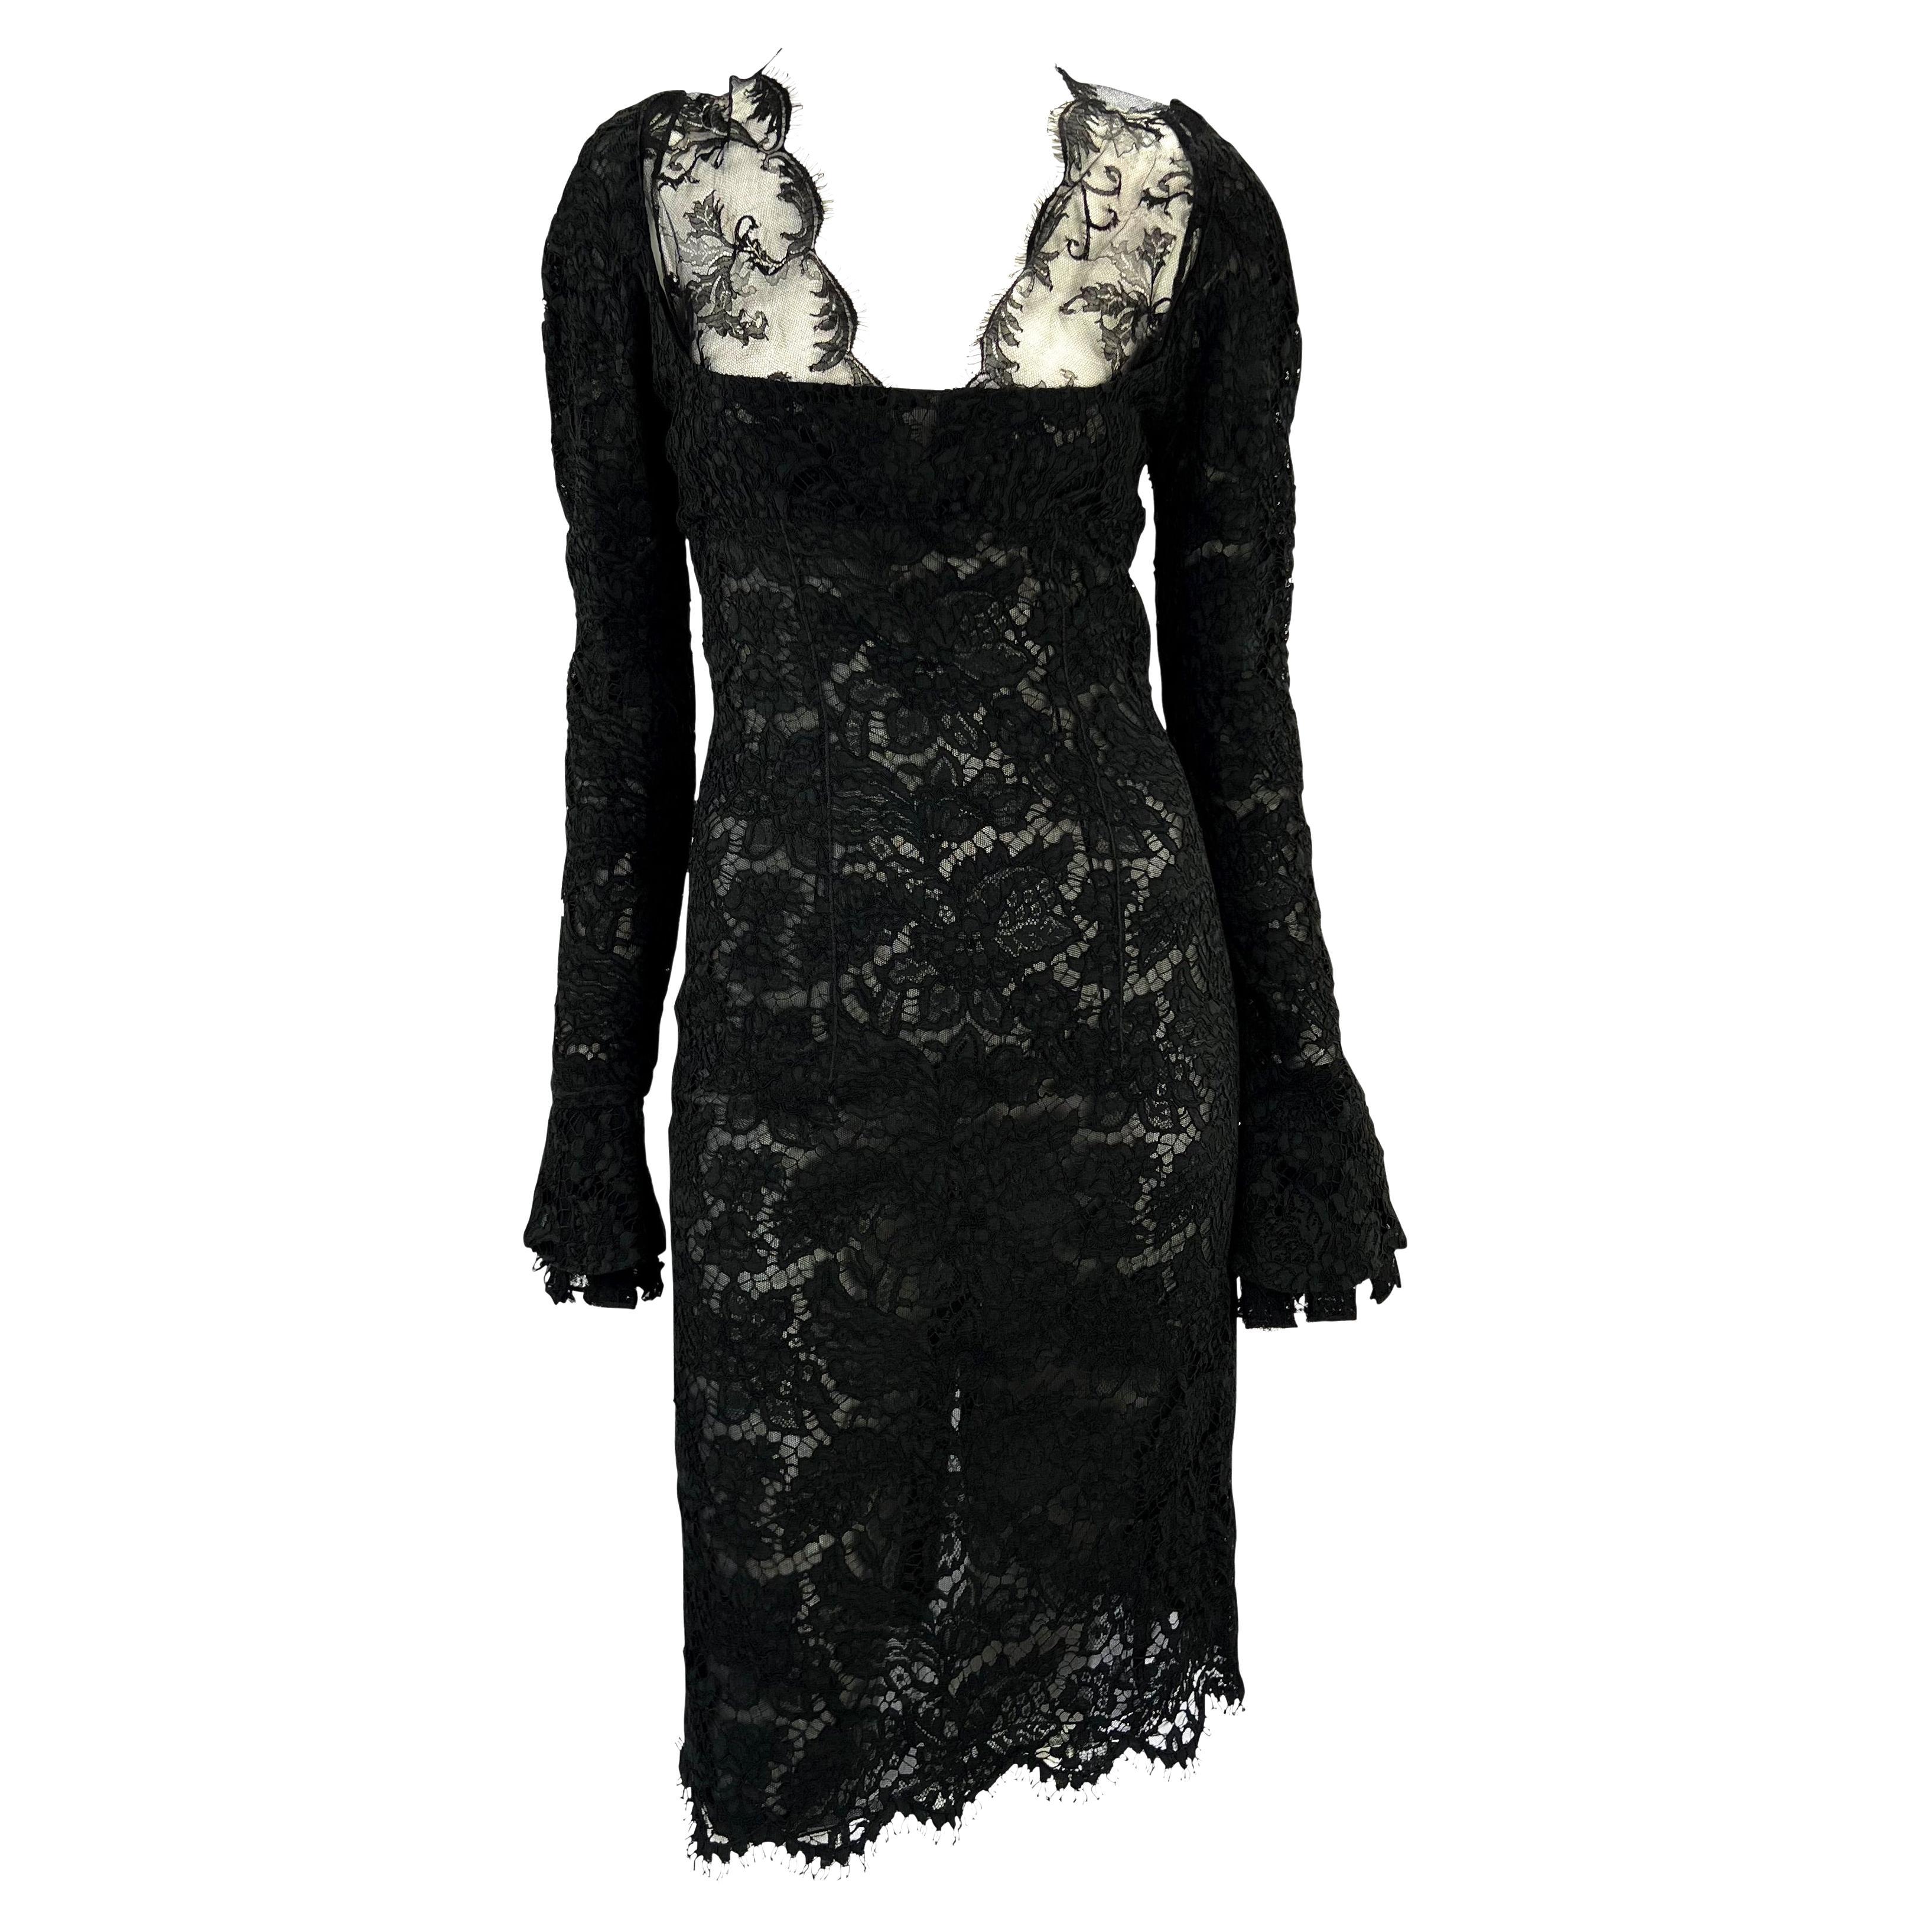 NWT F/W 2002 Yves Saint Laurent by Tom Ford Runway Sheer Lace Dress For Sale